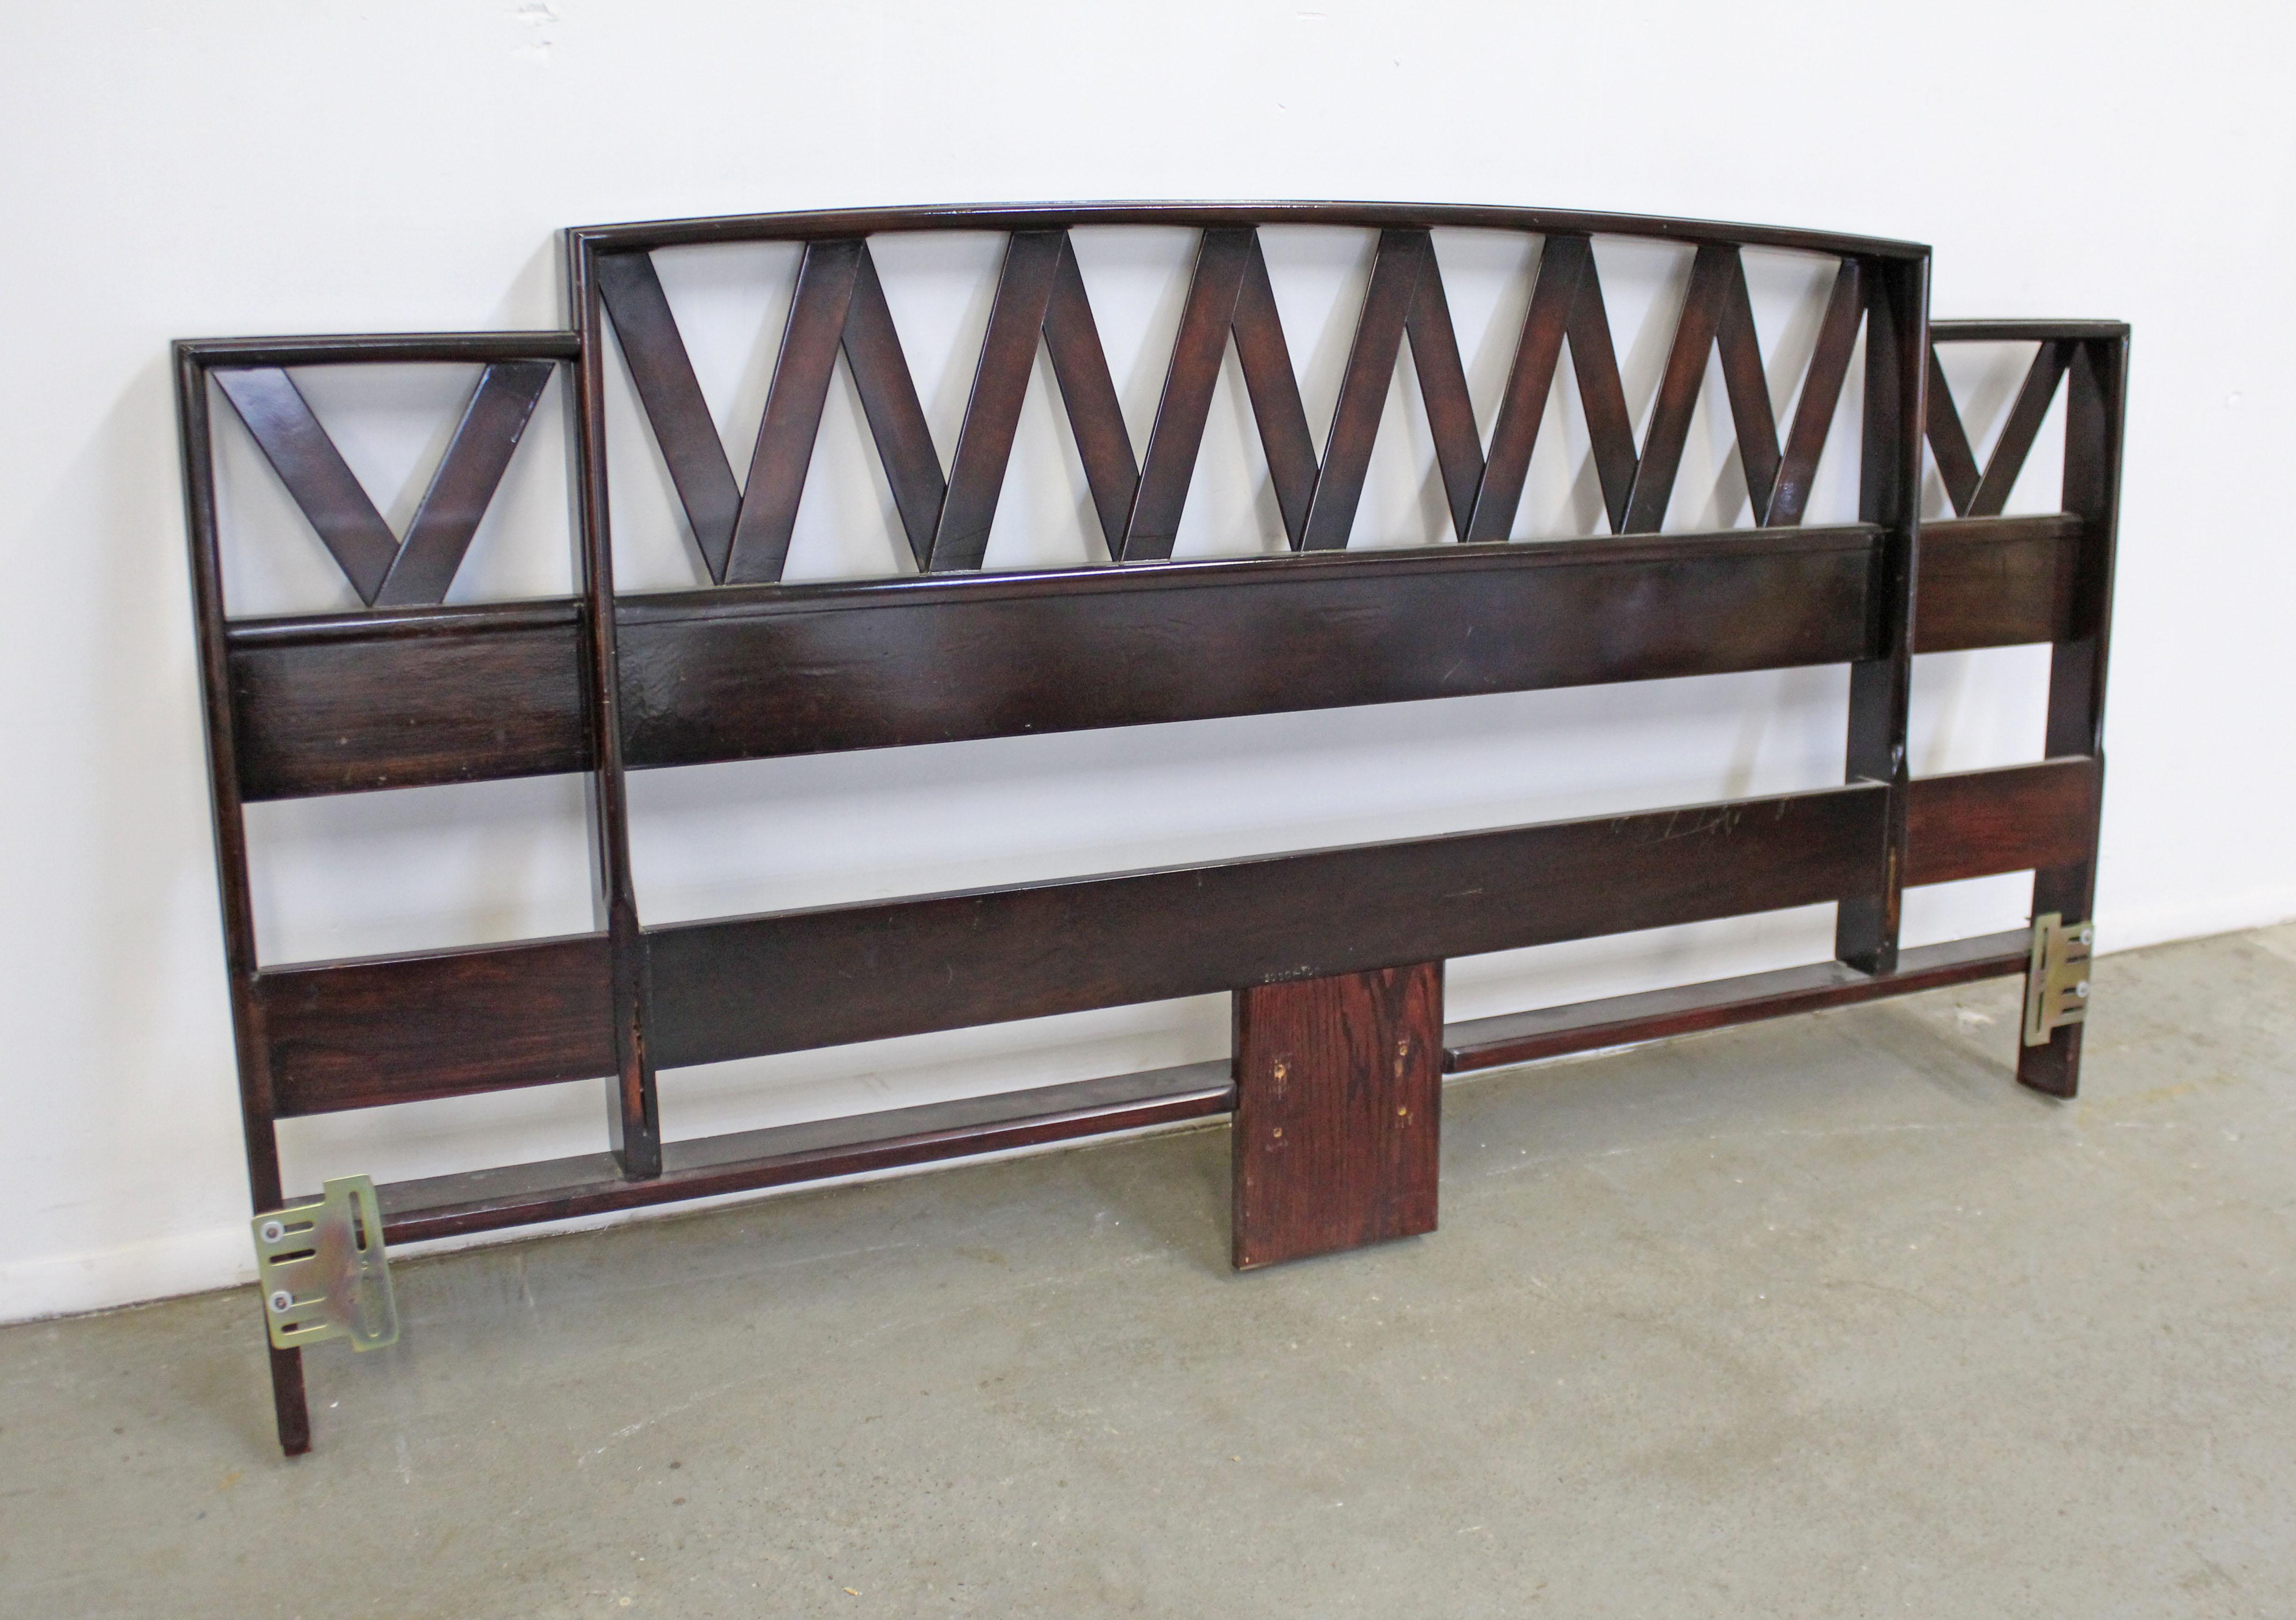 Offered is a vintage king size headboard with a zig-zag pattern designed by Paul Frankl. Looks to be walnut in a dark finish and shiny stain. It is in good structurally sound vintage with some surface scratches (see photos). Metal brackets were